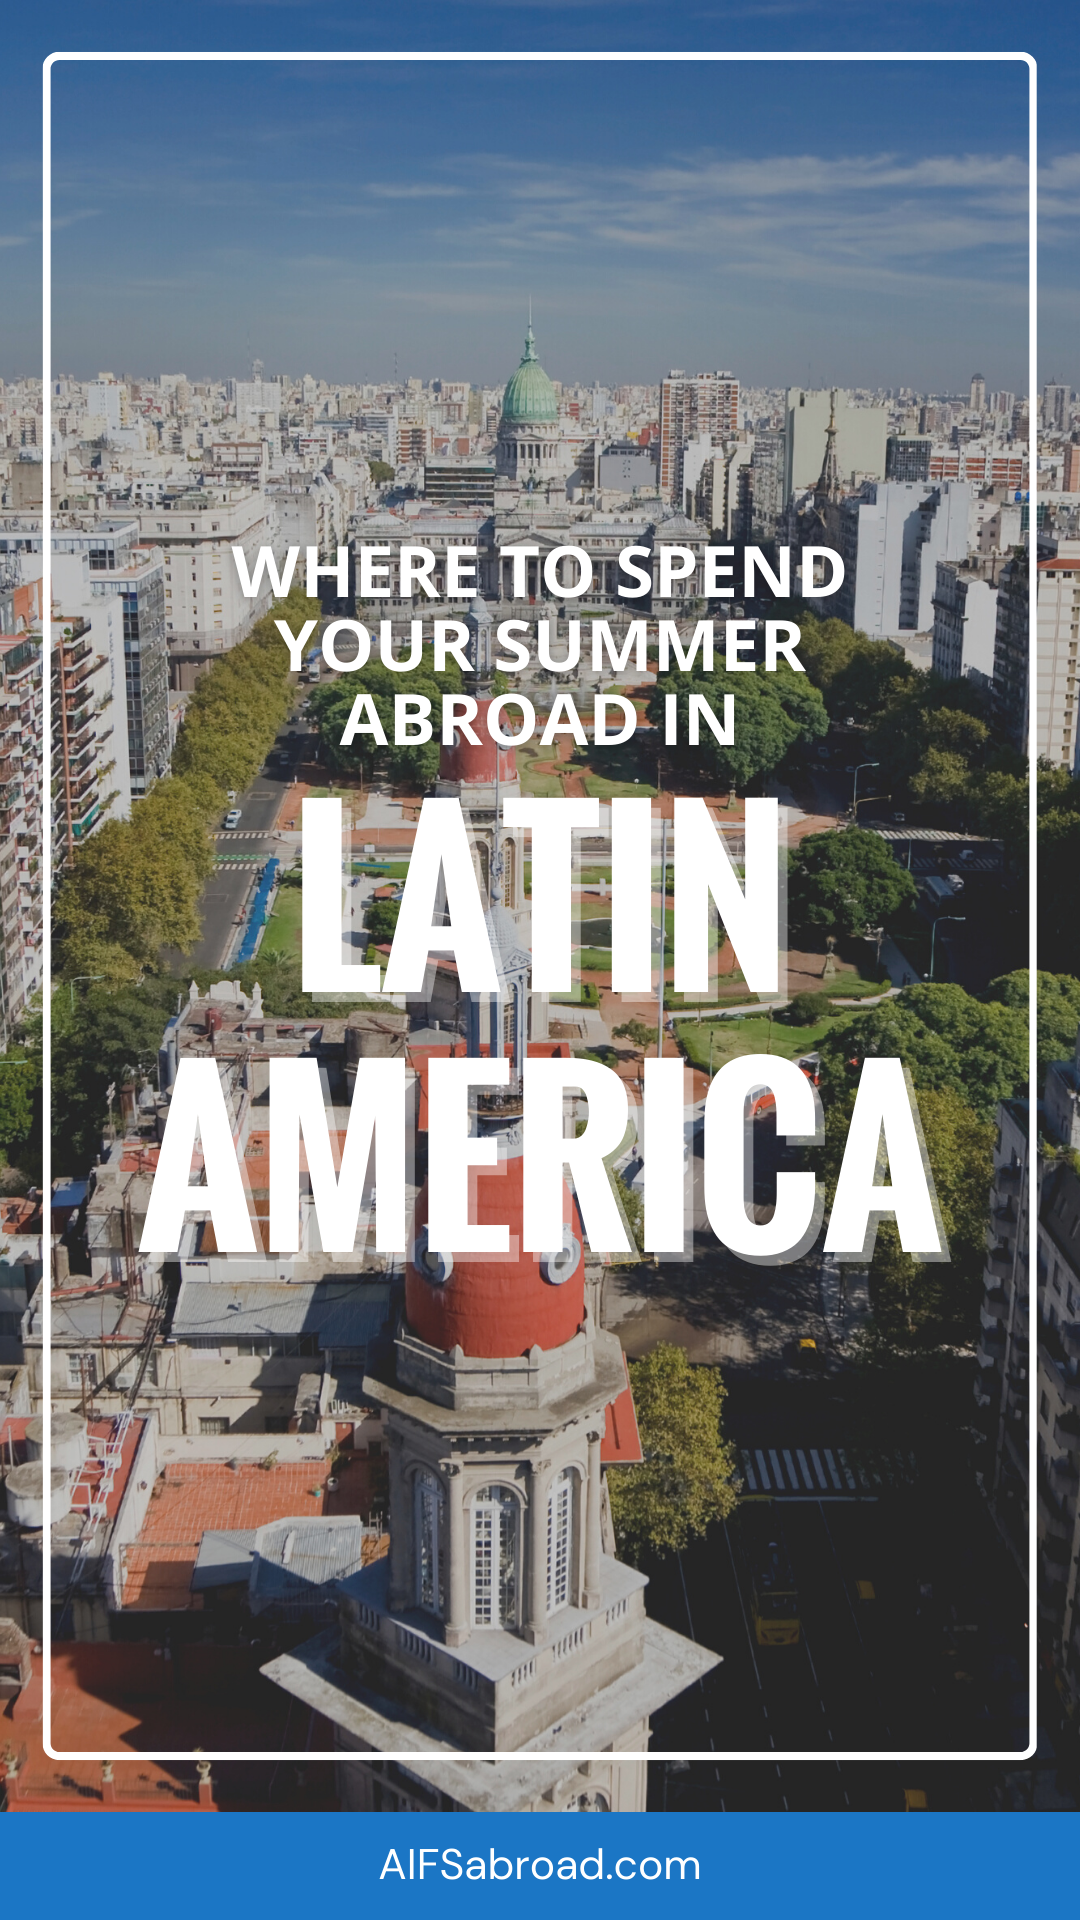 Pin Image: Where to spend your summer abroad in Latin America